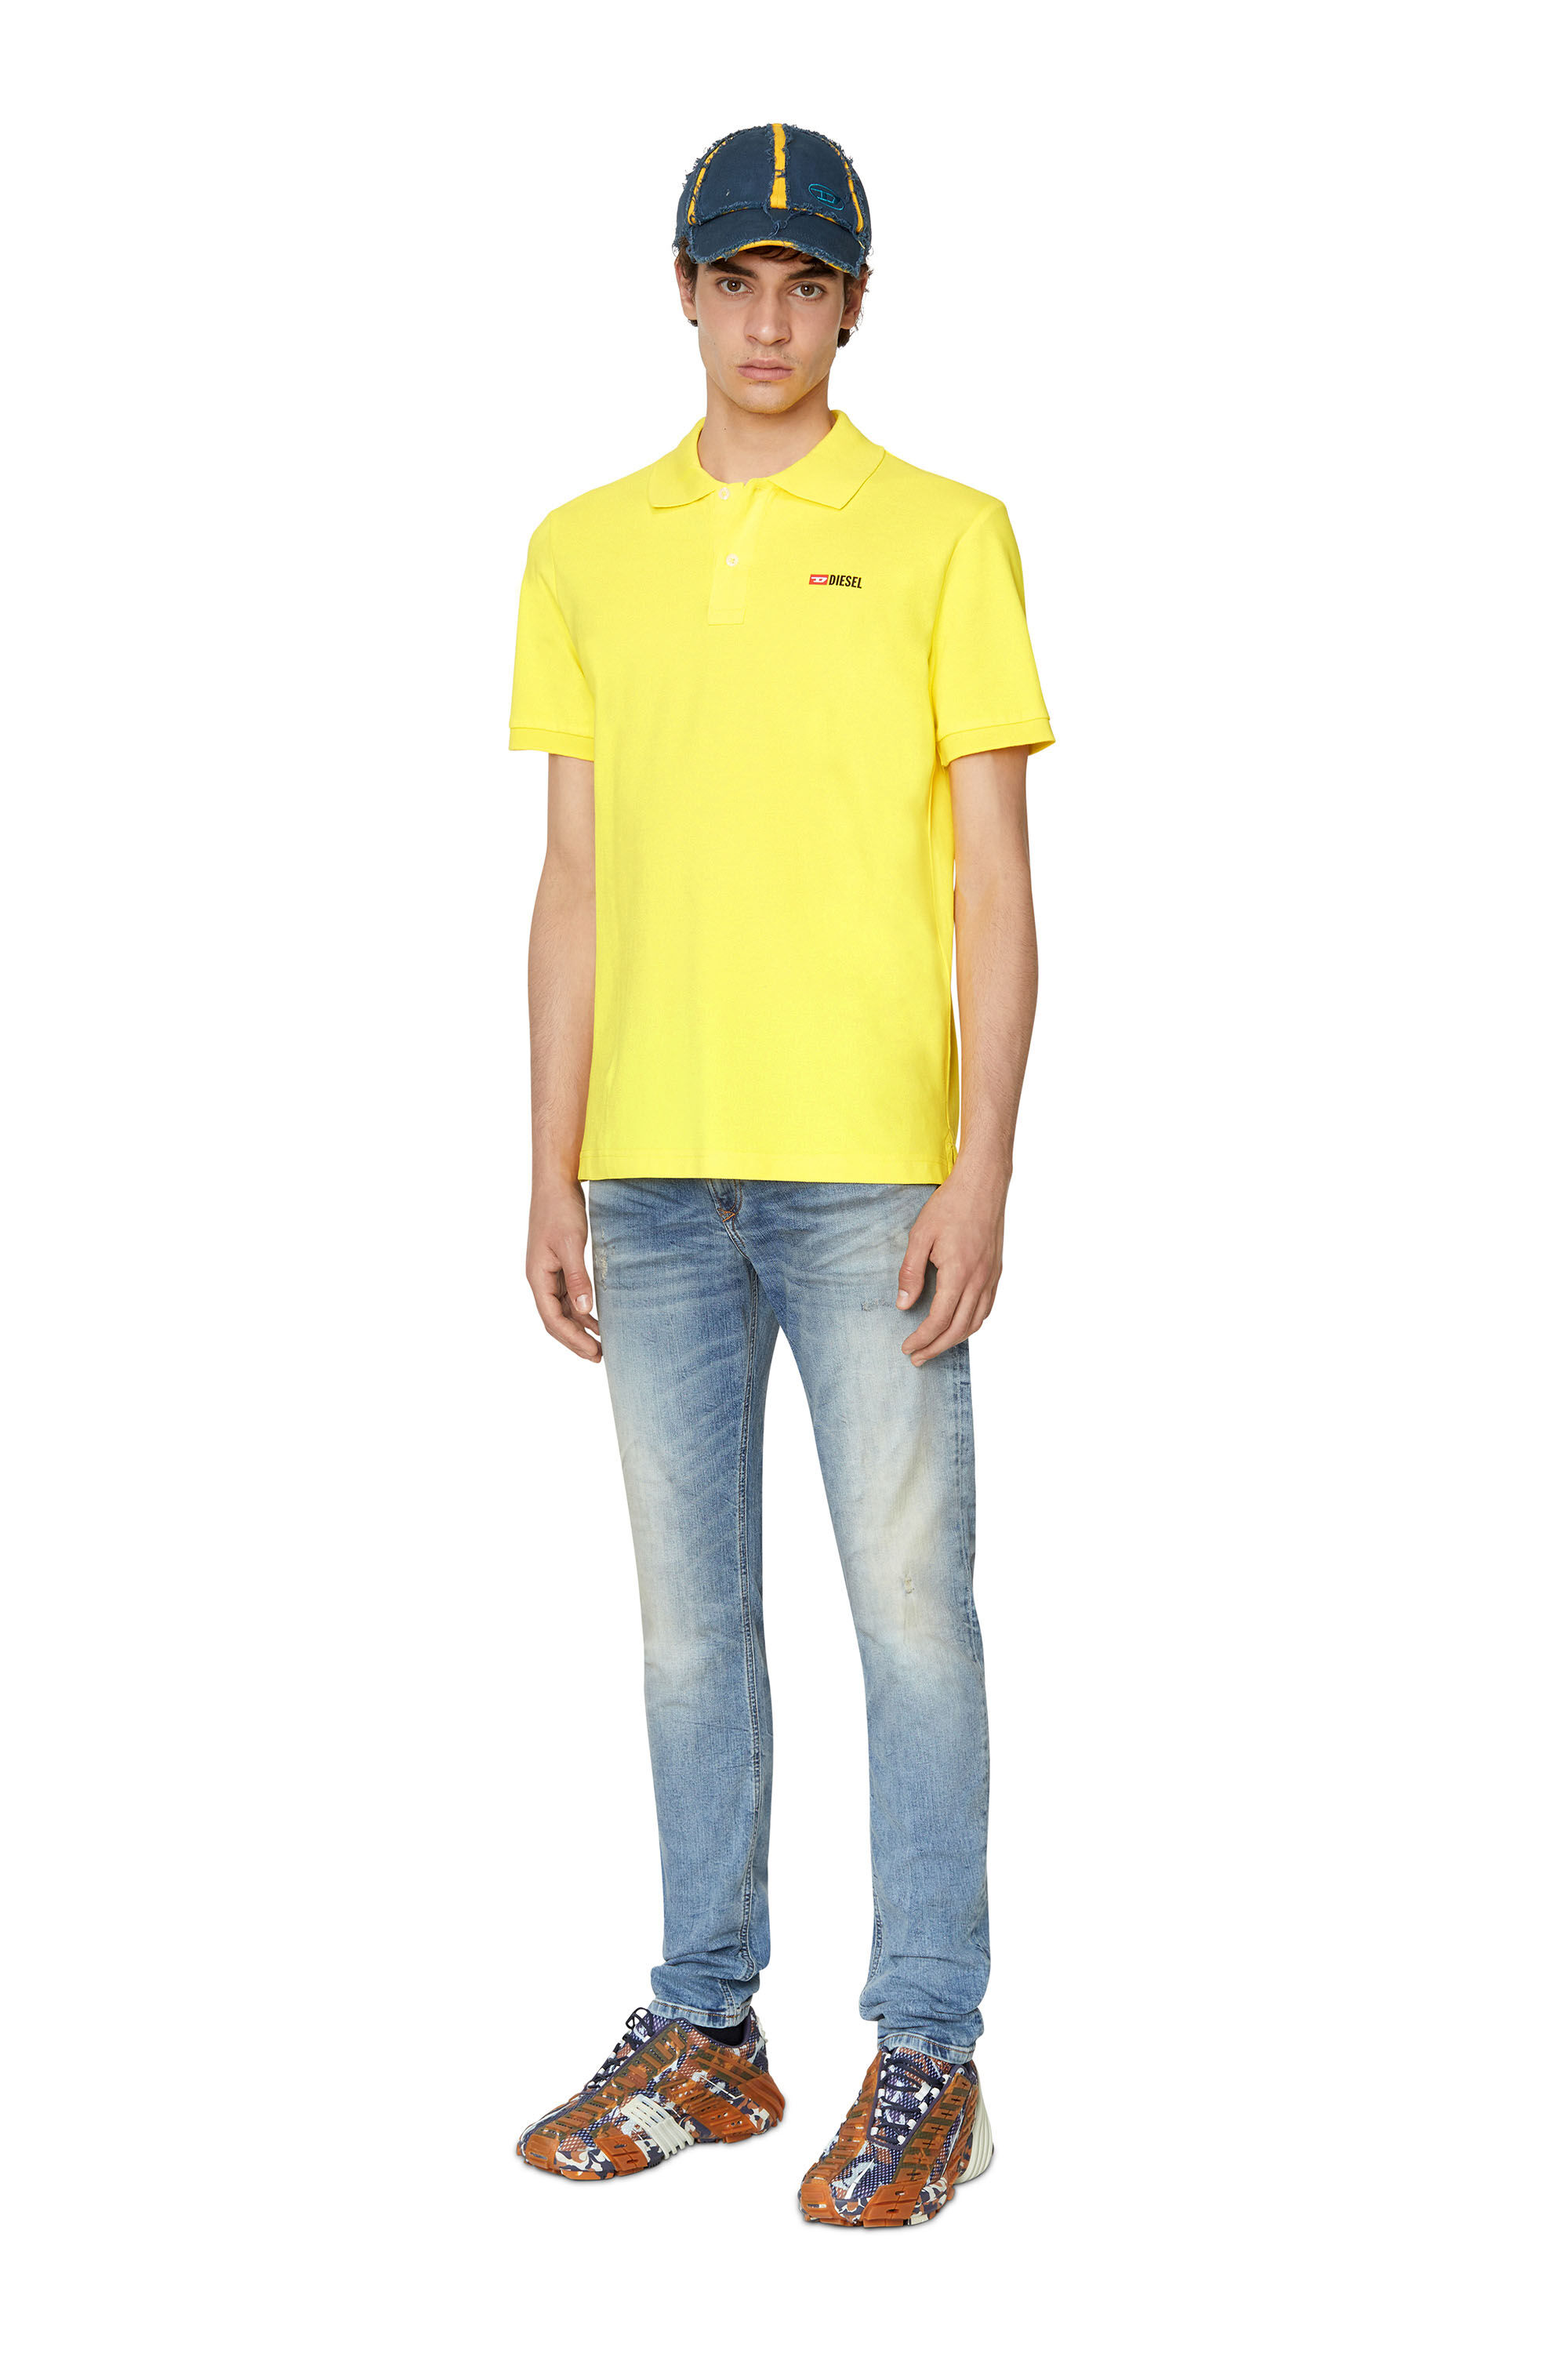 Diesel - T-SMITH-DIV, Yellow - Image 1